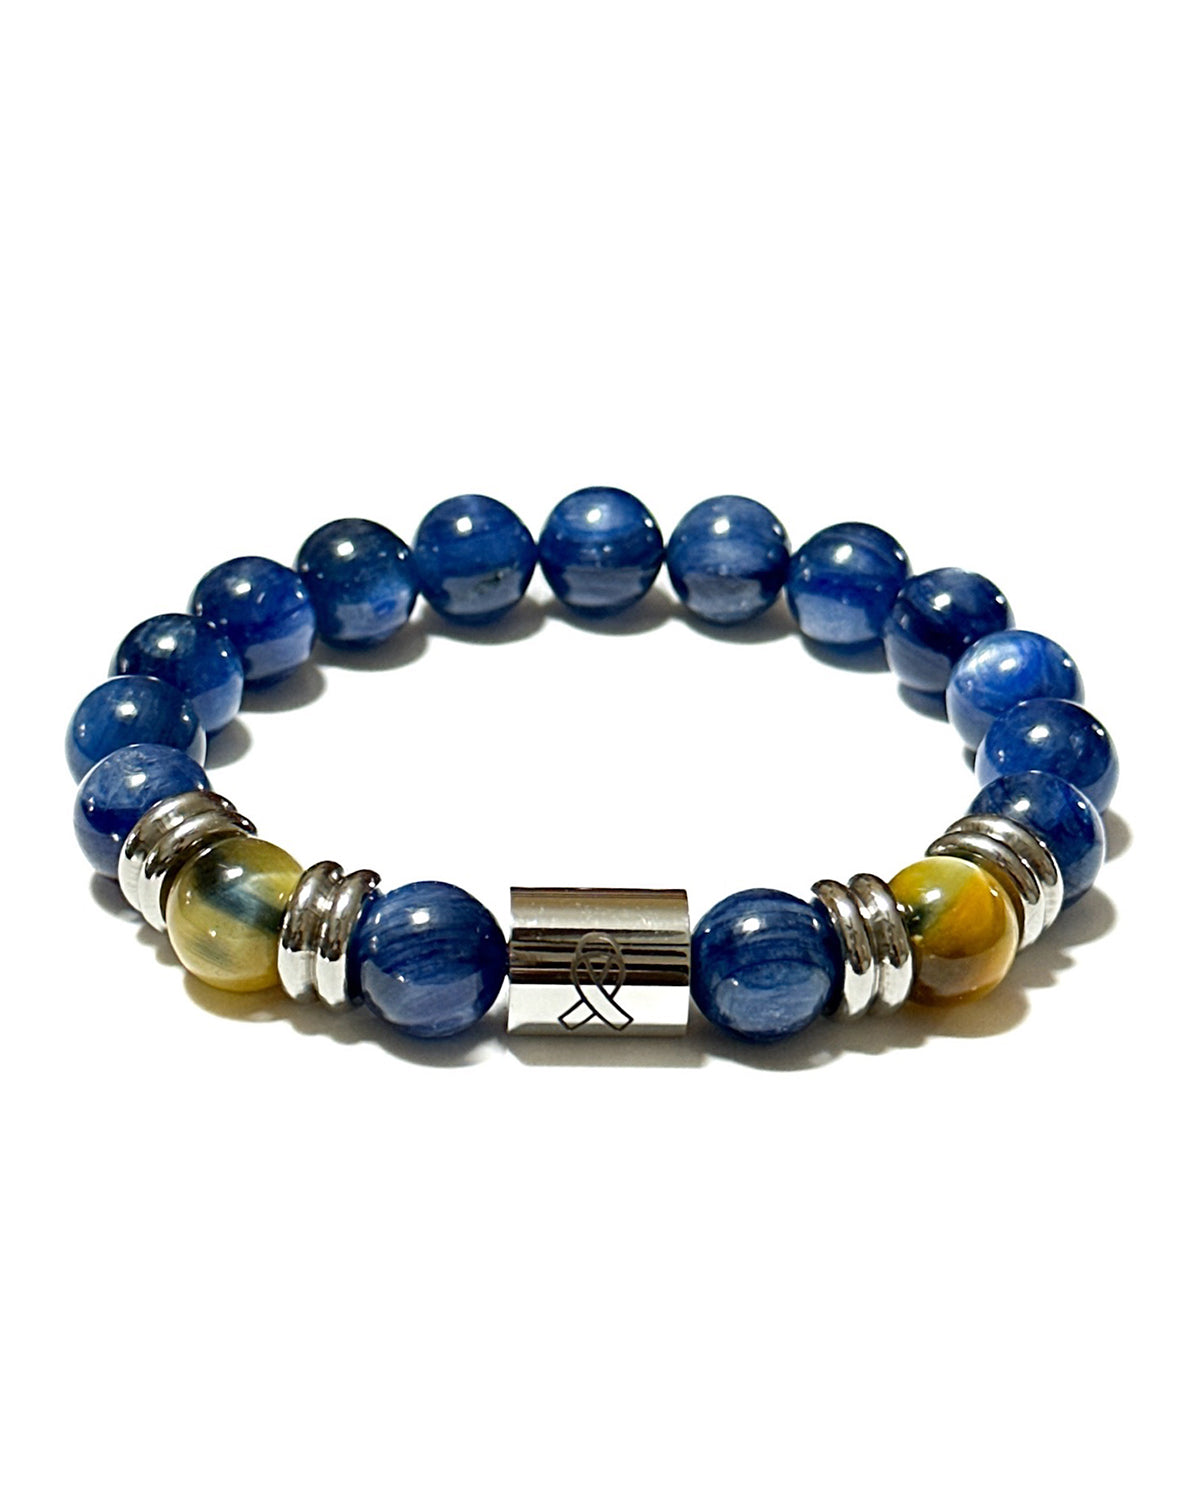 Resilience Cancer Awareness Wellness Healing Intention Unisex Bracelet with Blue Kyanite, Golden Tiger's Eye, Stainless Steel 7.5 inch